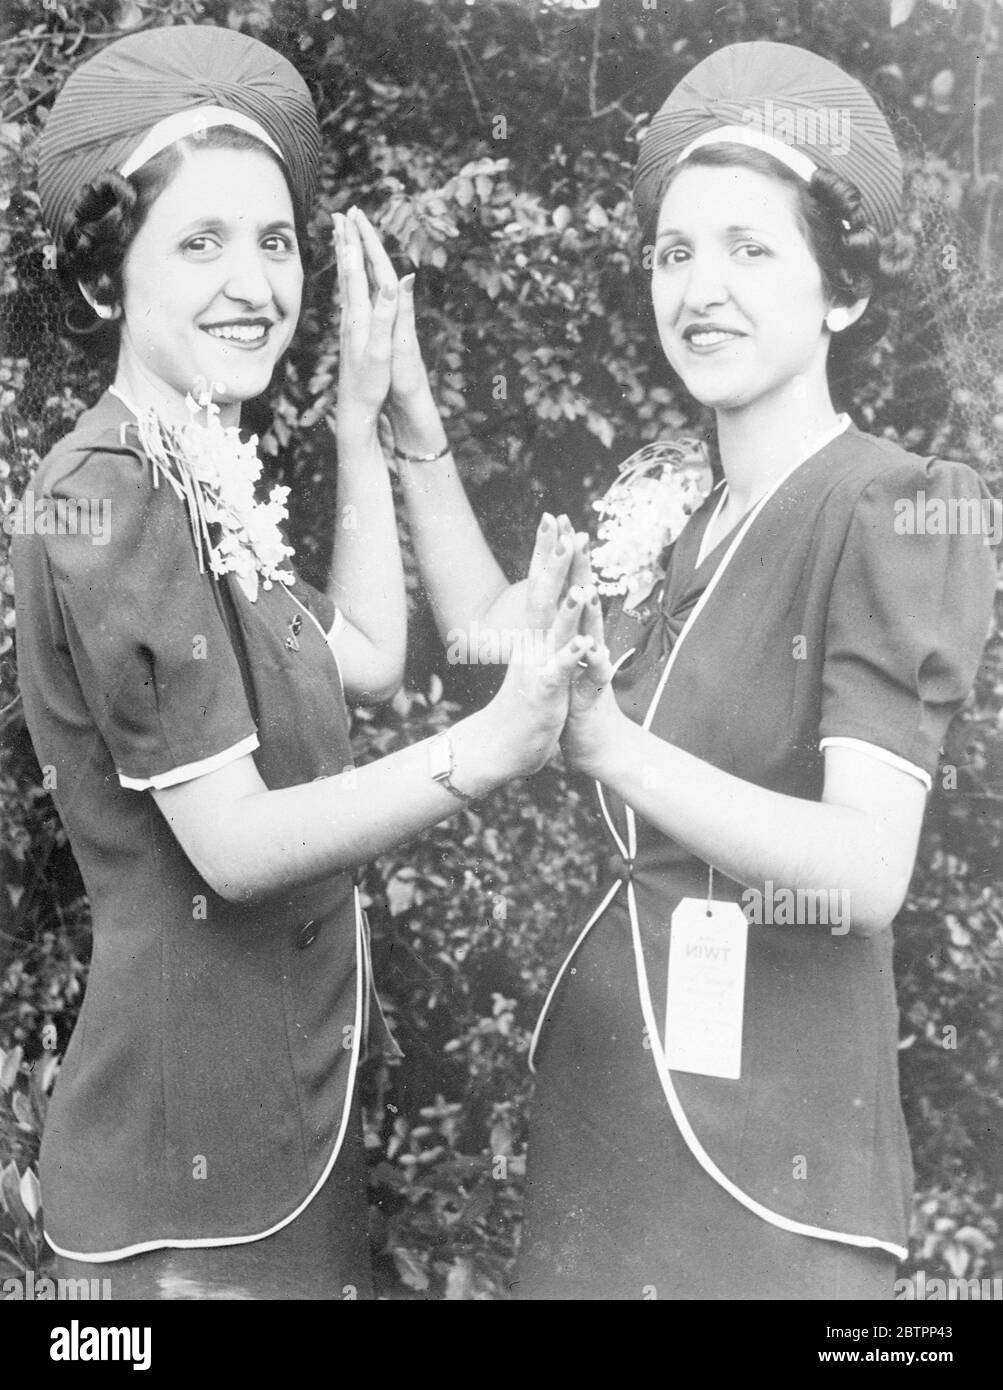 Twins beat the judge. Because they couldn't tell them apart, judges at the international Twin Convention in Chicago, Illinois, admitted defeat and awarded first prize and title of 'Most Identical Twins' to Virginia (left) and Ann Maenza of Birmingham, Alabama. The twins are 21 years old, and even their friends can't identify them. 5 September 1938 Stock Photo